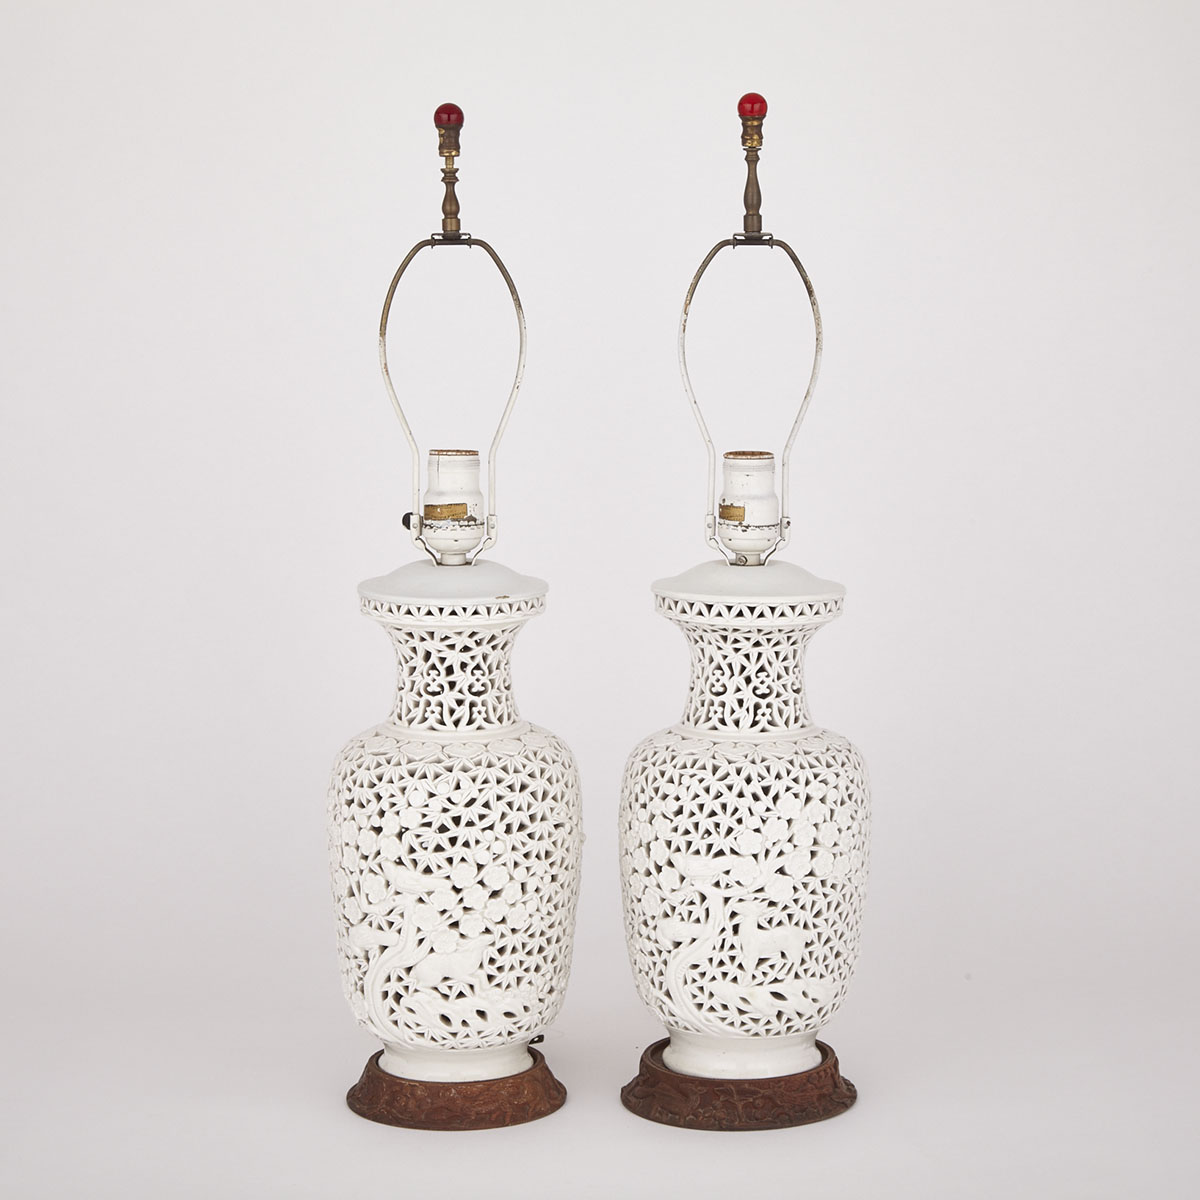 Pair of White Glazed Porcelain Lamps, early 20th Century